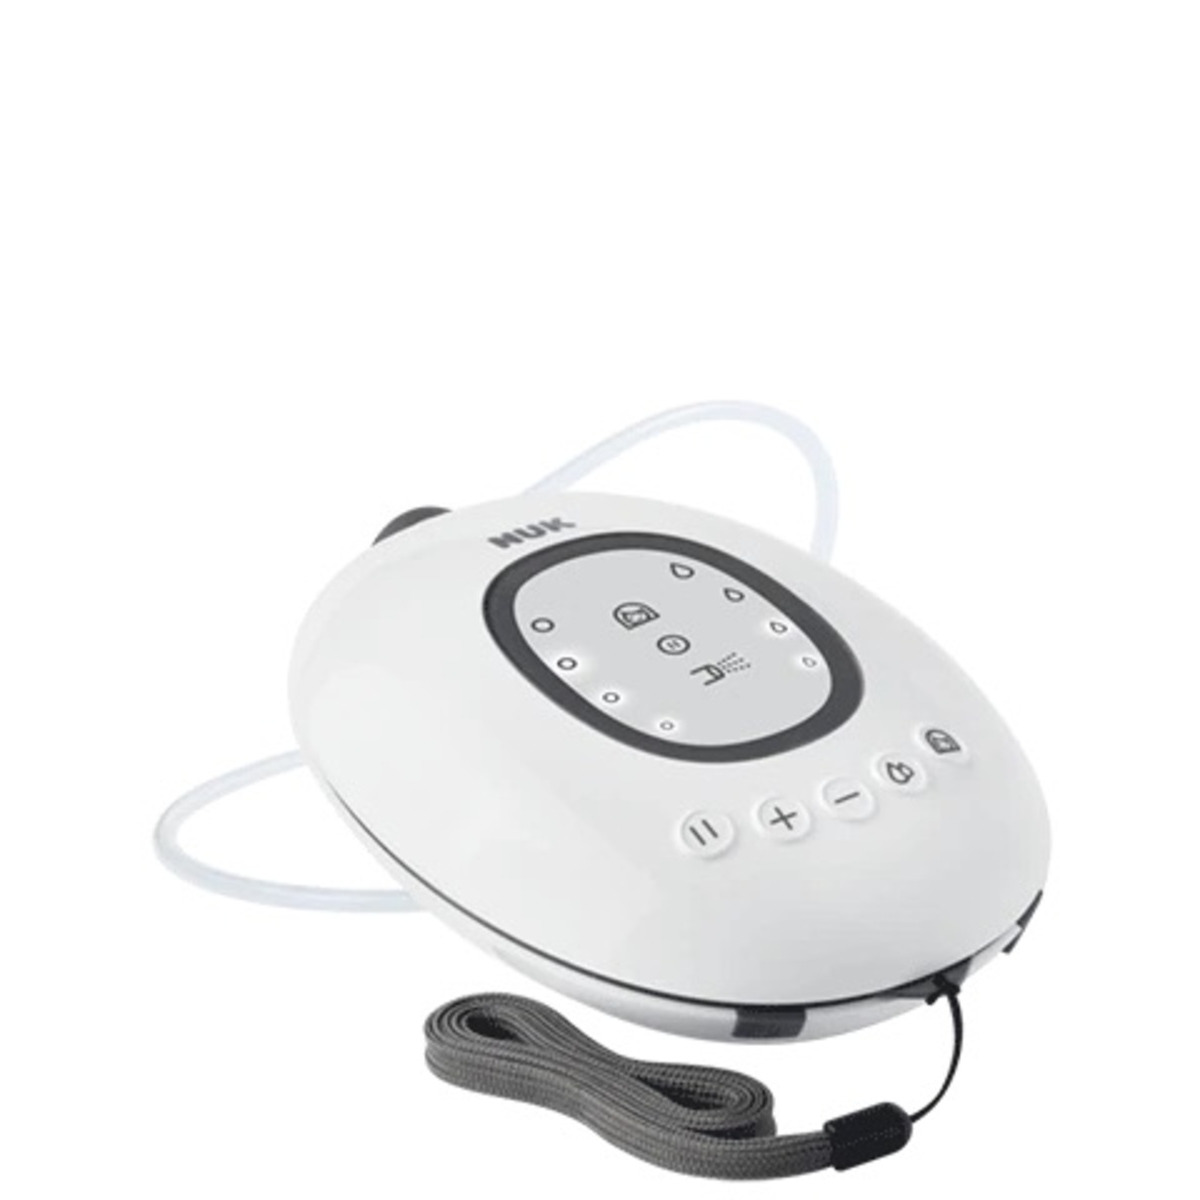 NUK First Choice Electric Breast Pump